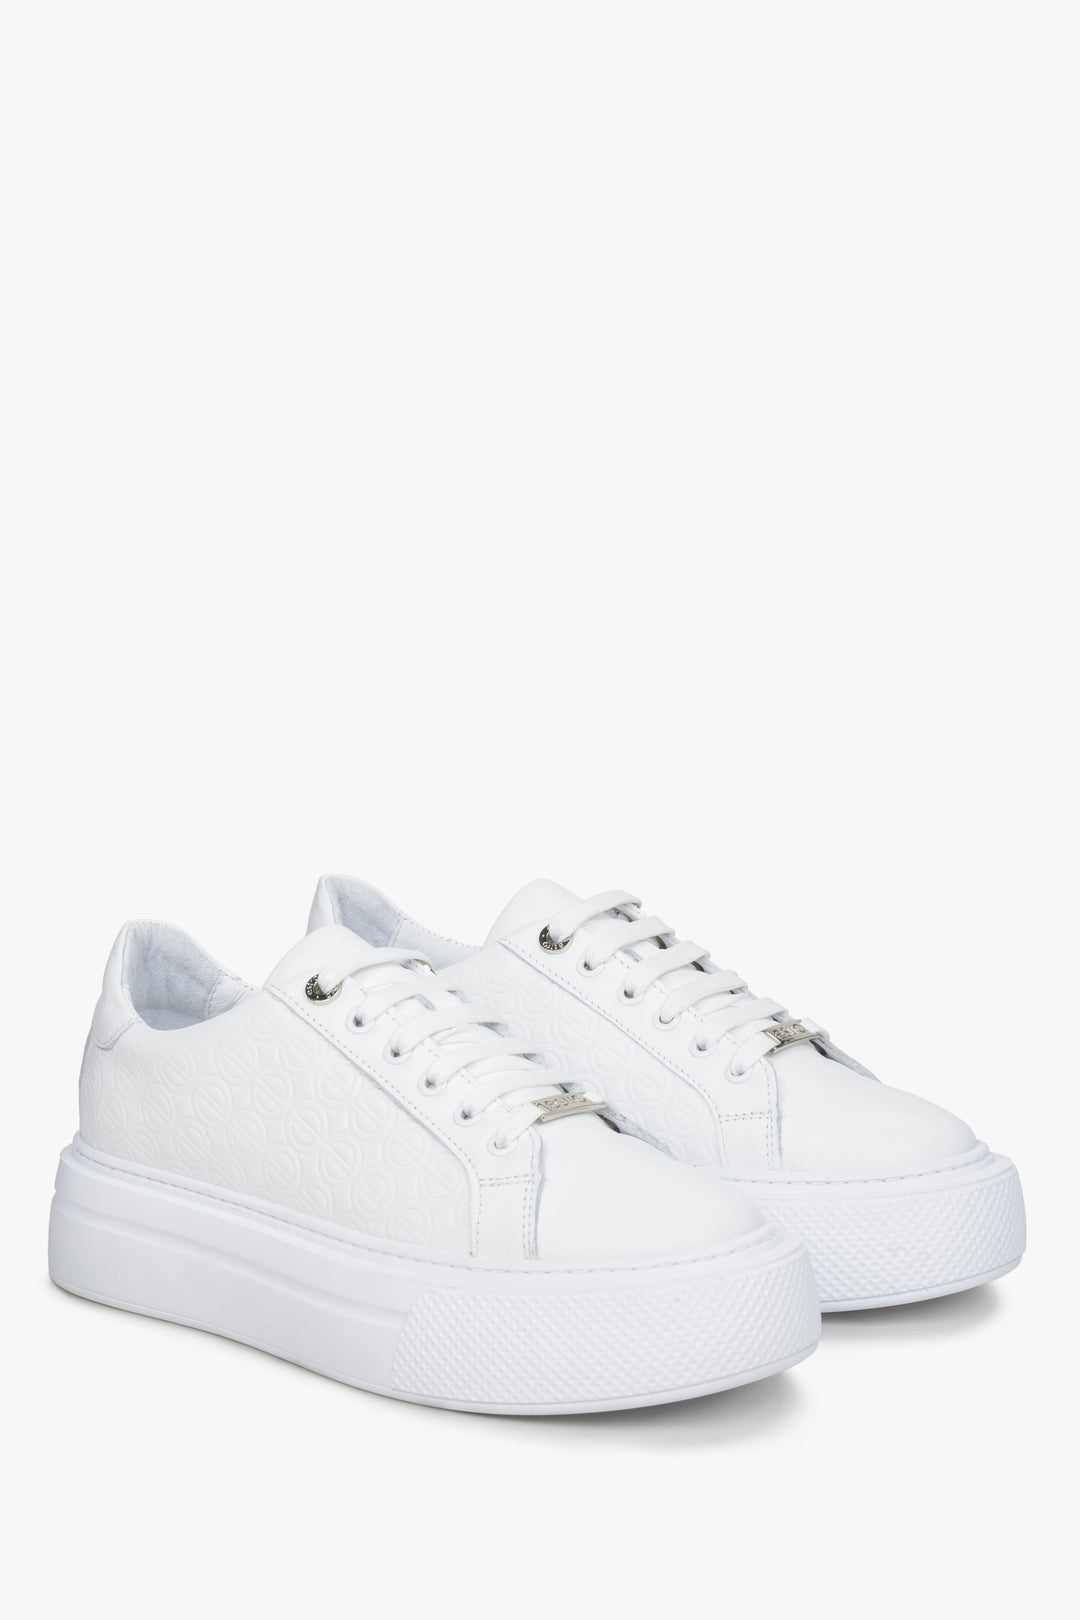 Women's white sneakers made of genuine leather with thick sole.